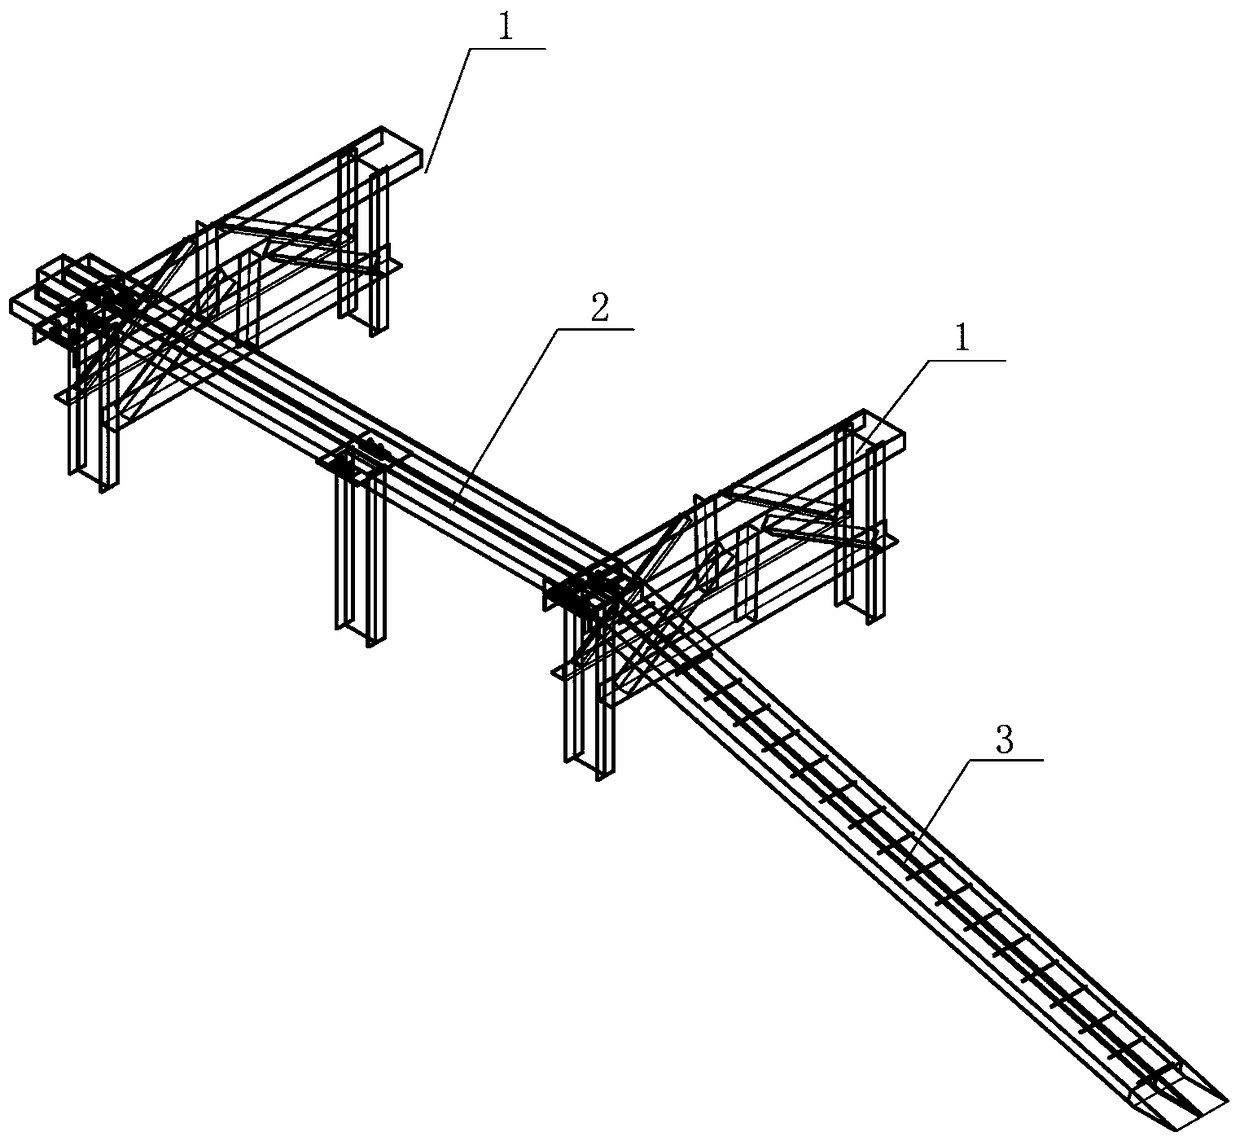 A detachable double-sided bridge and a method for installing and disassembling the same